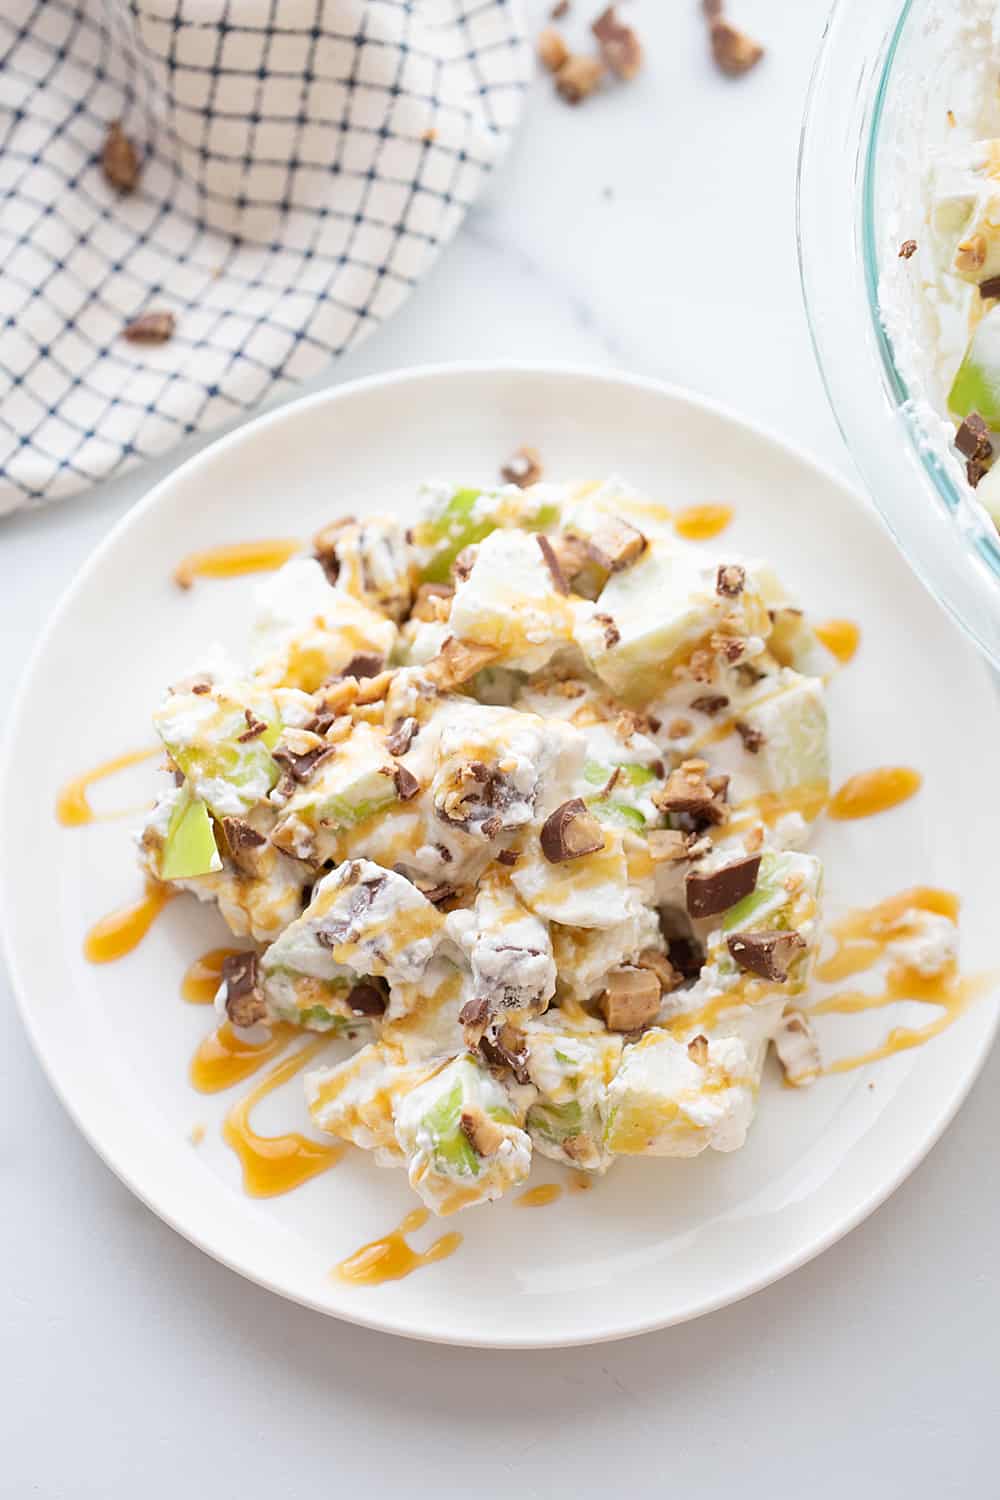 Easy Snickers Salad - This easy Snickers salad features Granny Smith apples, Snickers, and whipped topping with a drizzle of caramel and a sprinkle of toffee bits. #snickers #salad #dessert #halfscratched #easyrecipe #dessertsalad #sweets